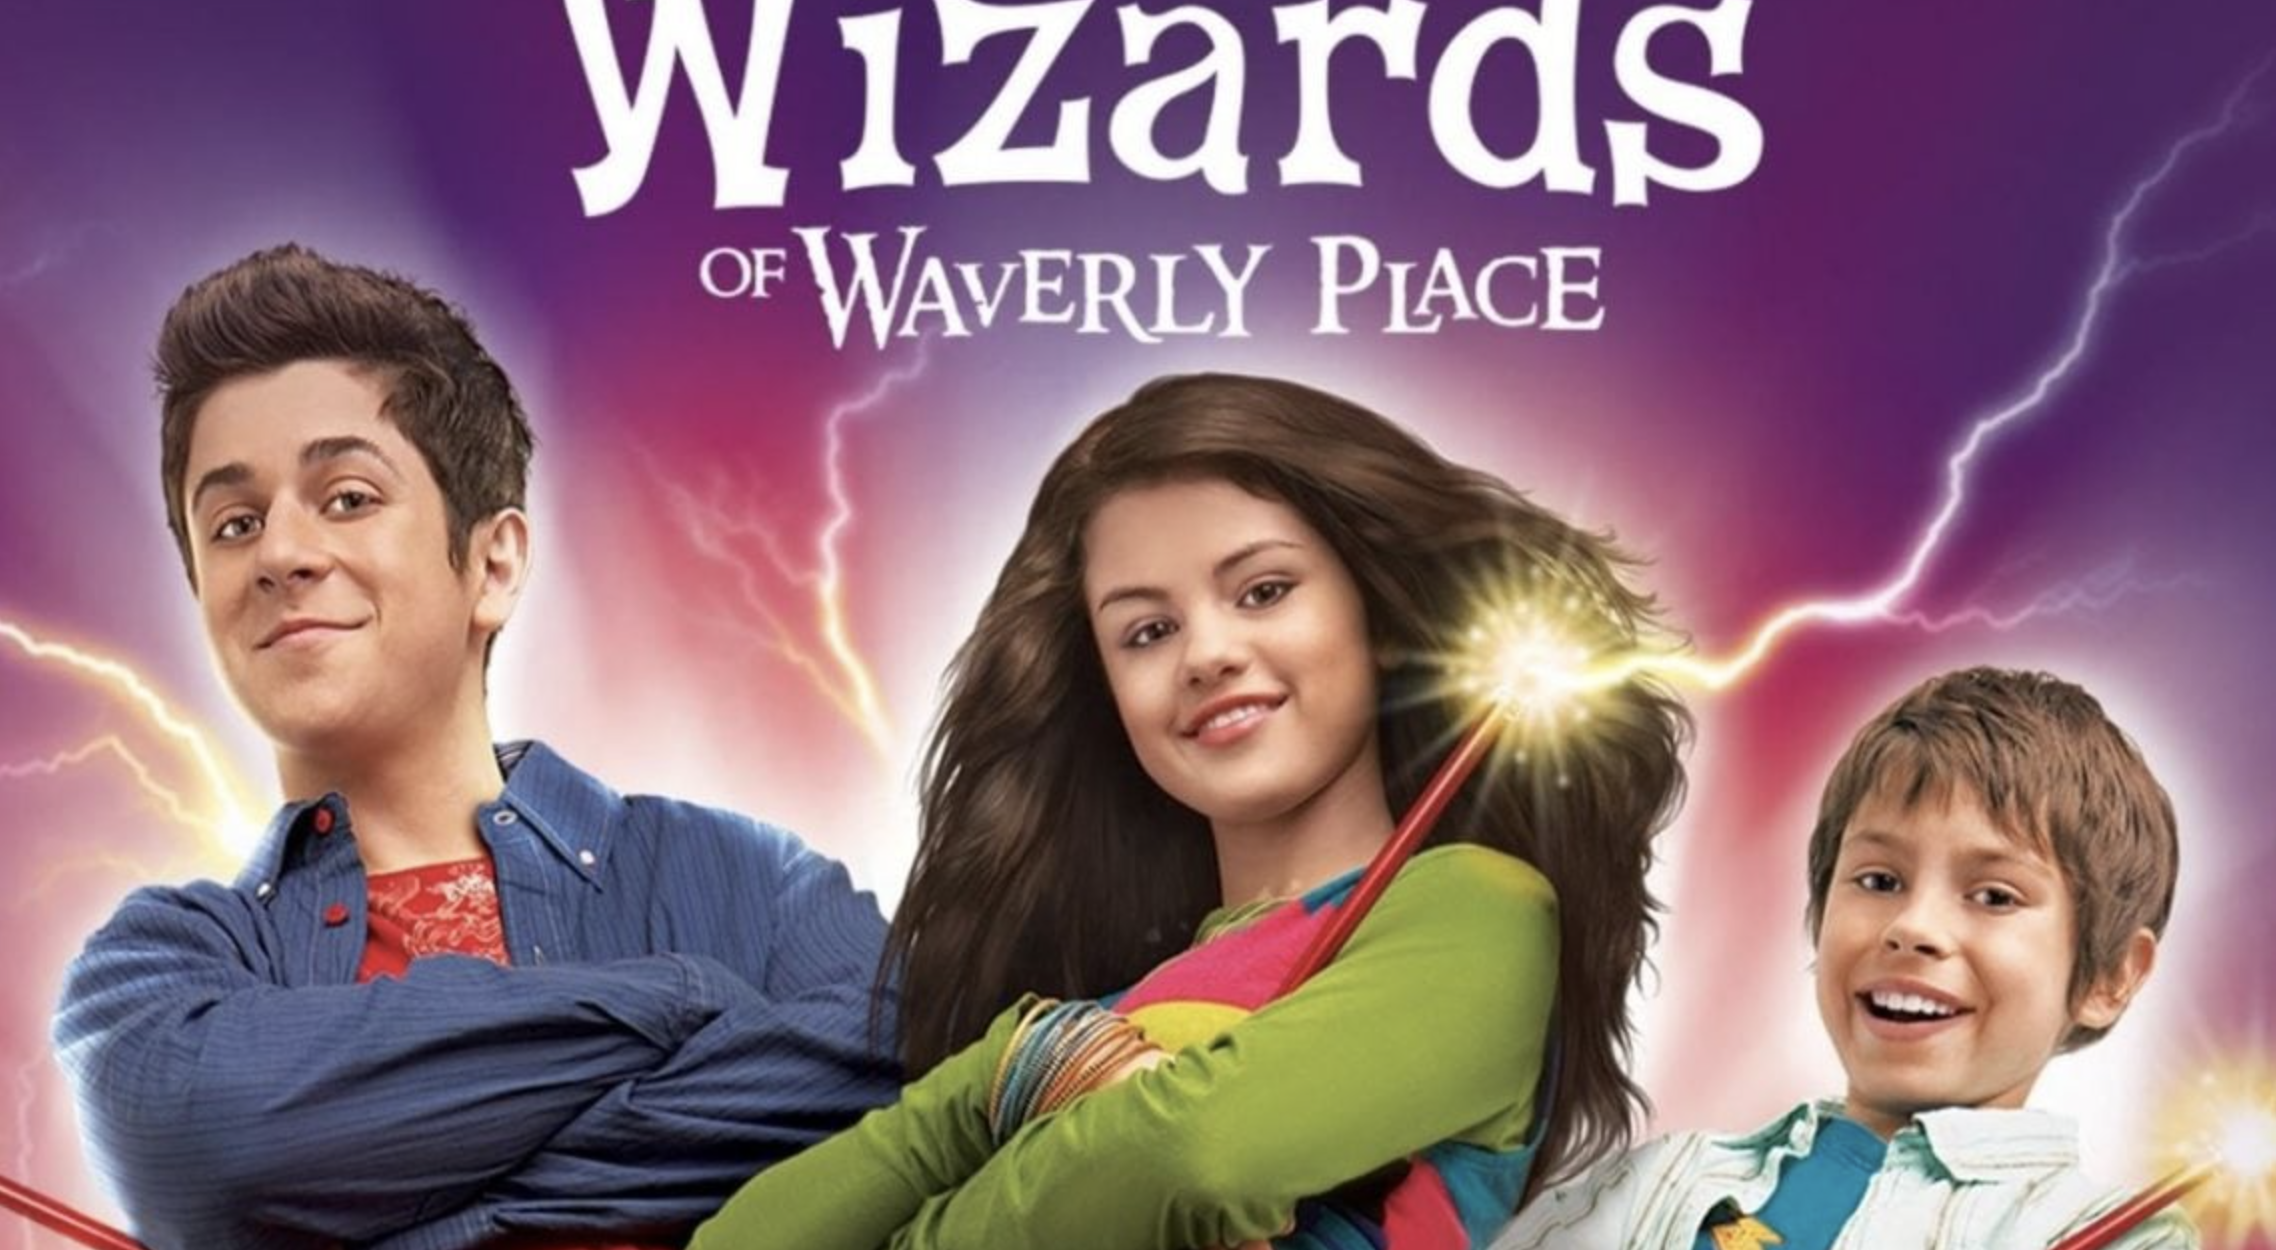 Selena Gomez Makes a Magical Comeback in ‘Wizards of Waverly Place’ Revival.